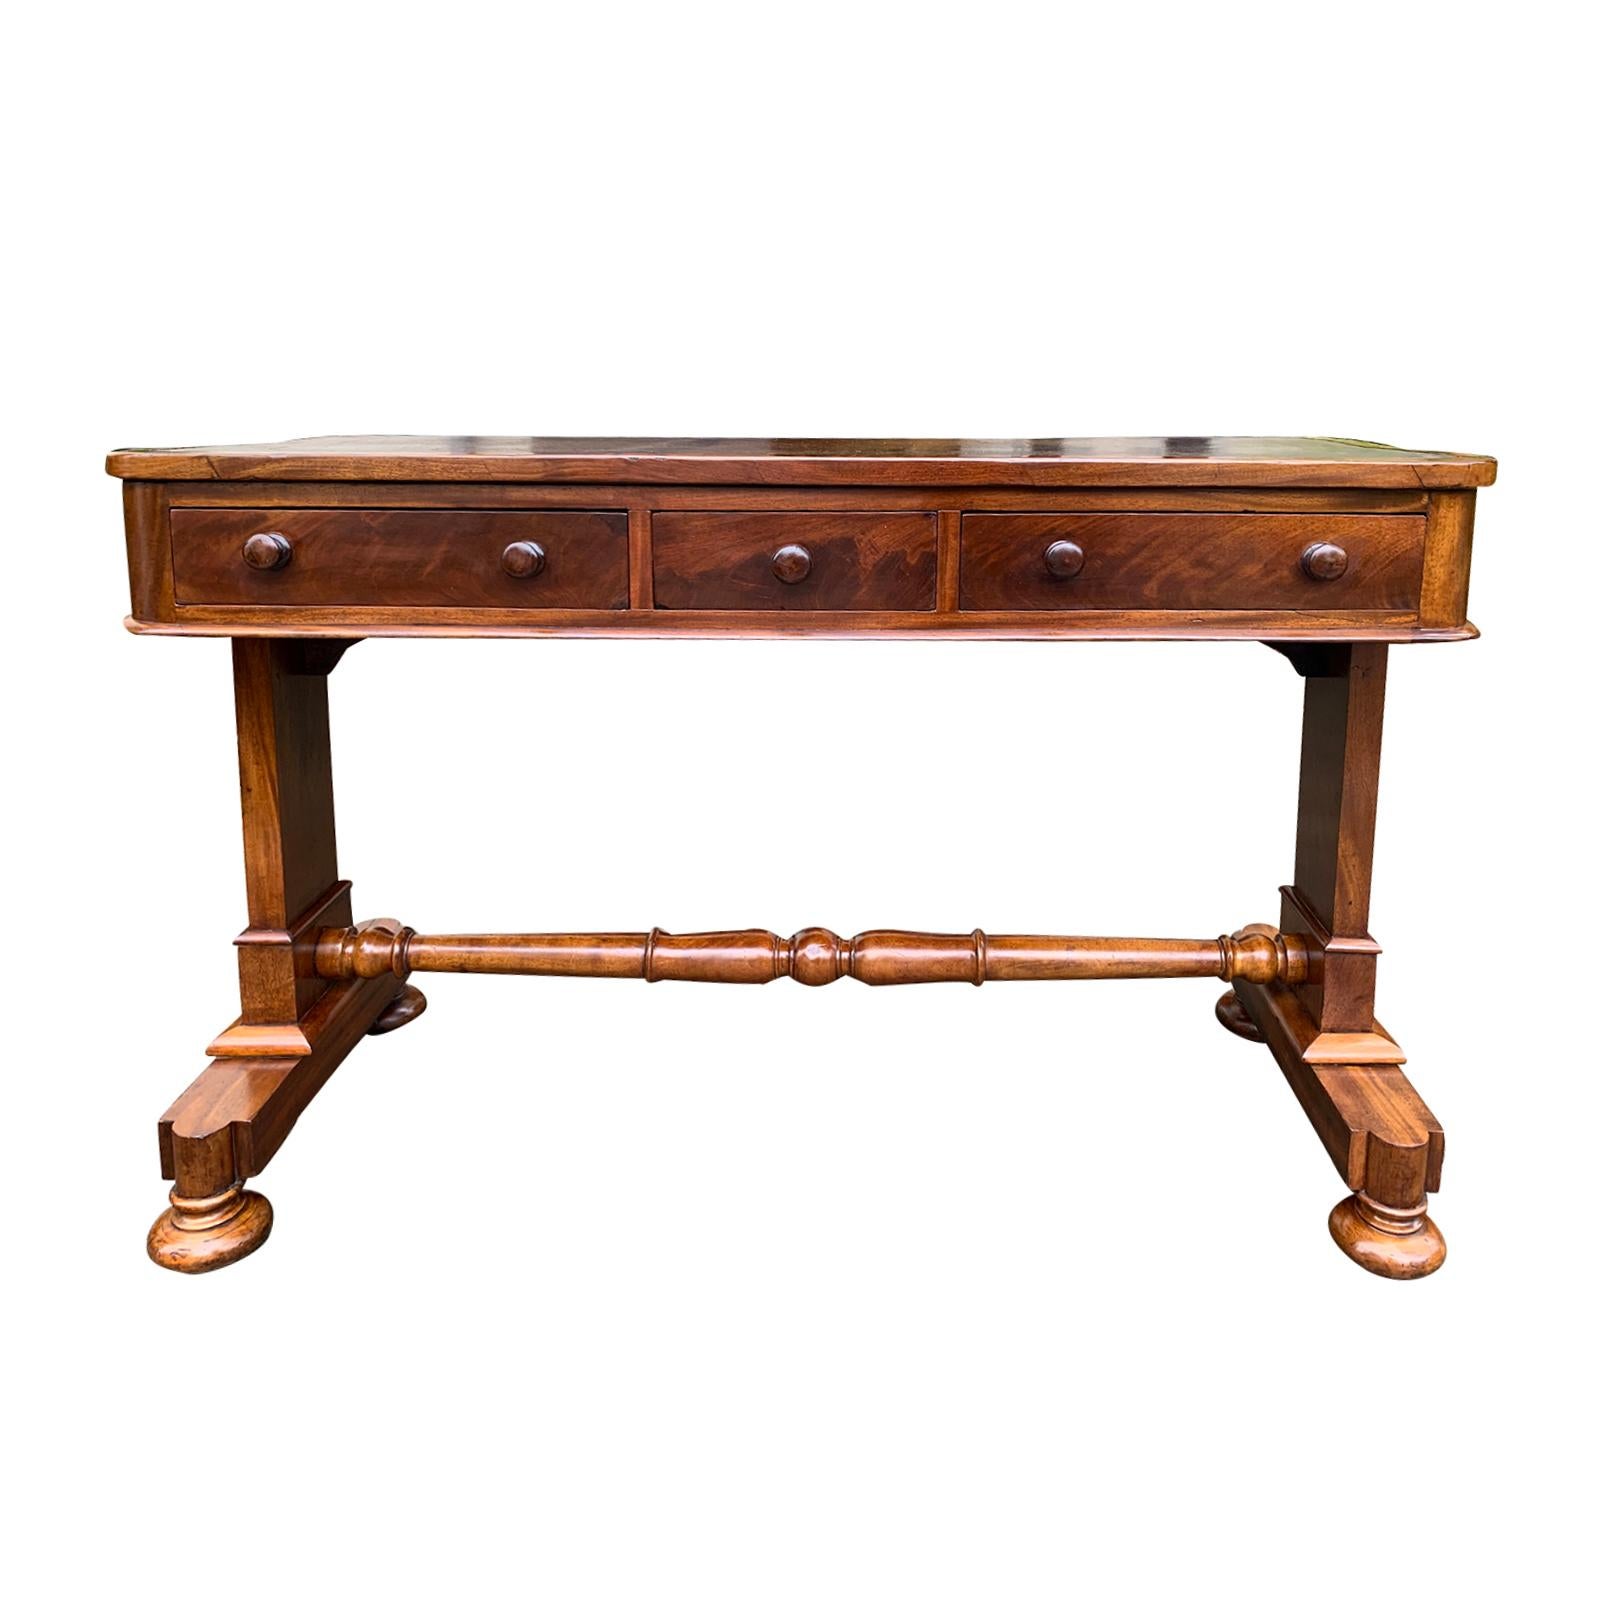 19th Century William IV Library Table or Desk with Leather Top, circa 1840s For Sale